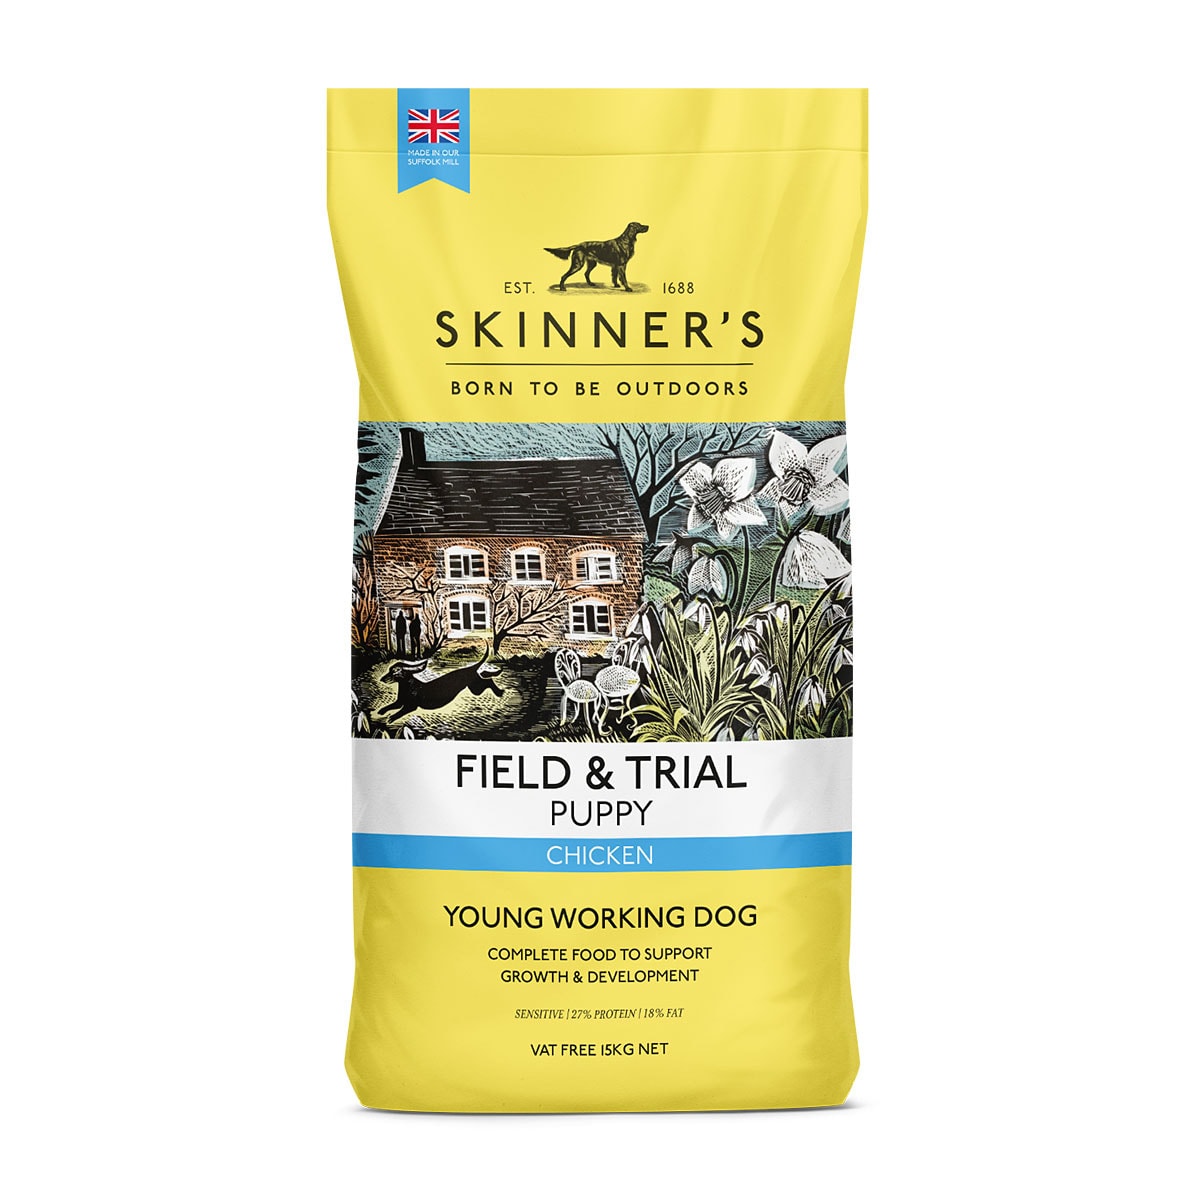 Skinners Field & Trial - Puppy Chicken Main Image